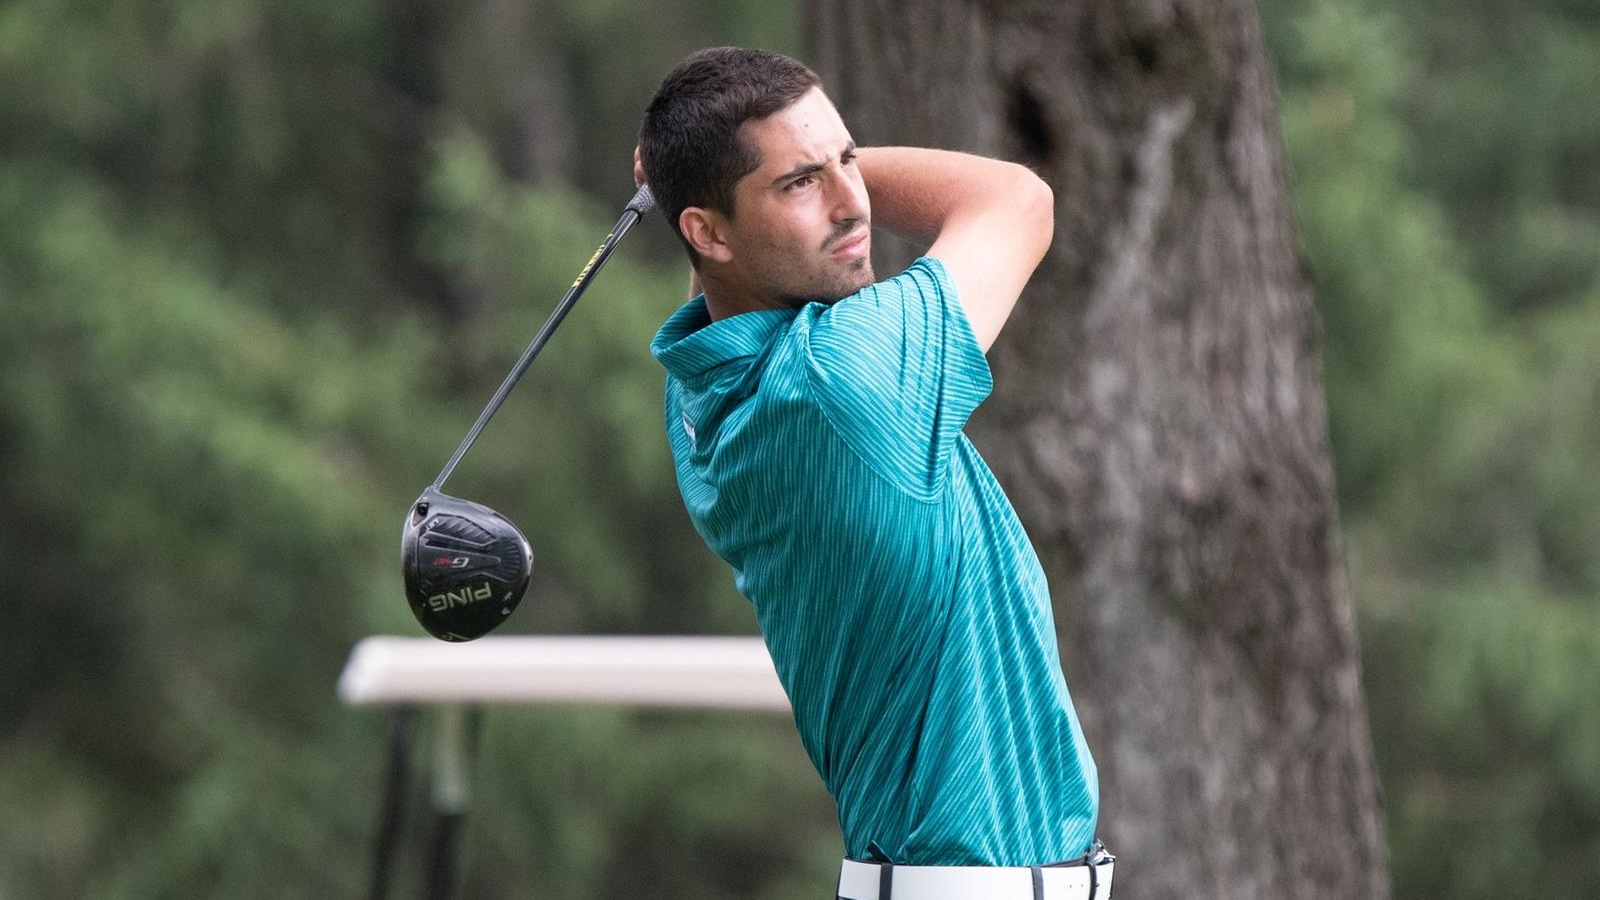 Cleveland State Men’s Golf 11th after Day One of Wexford Intercollegiate